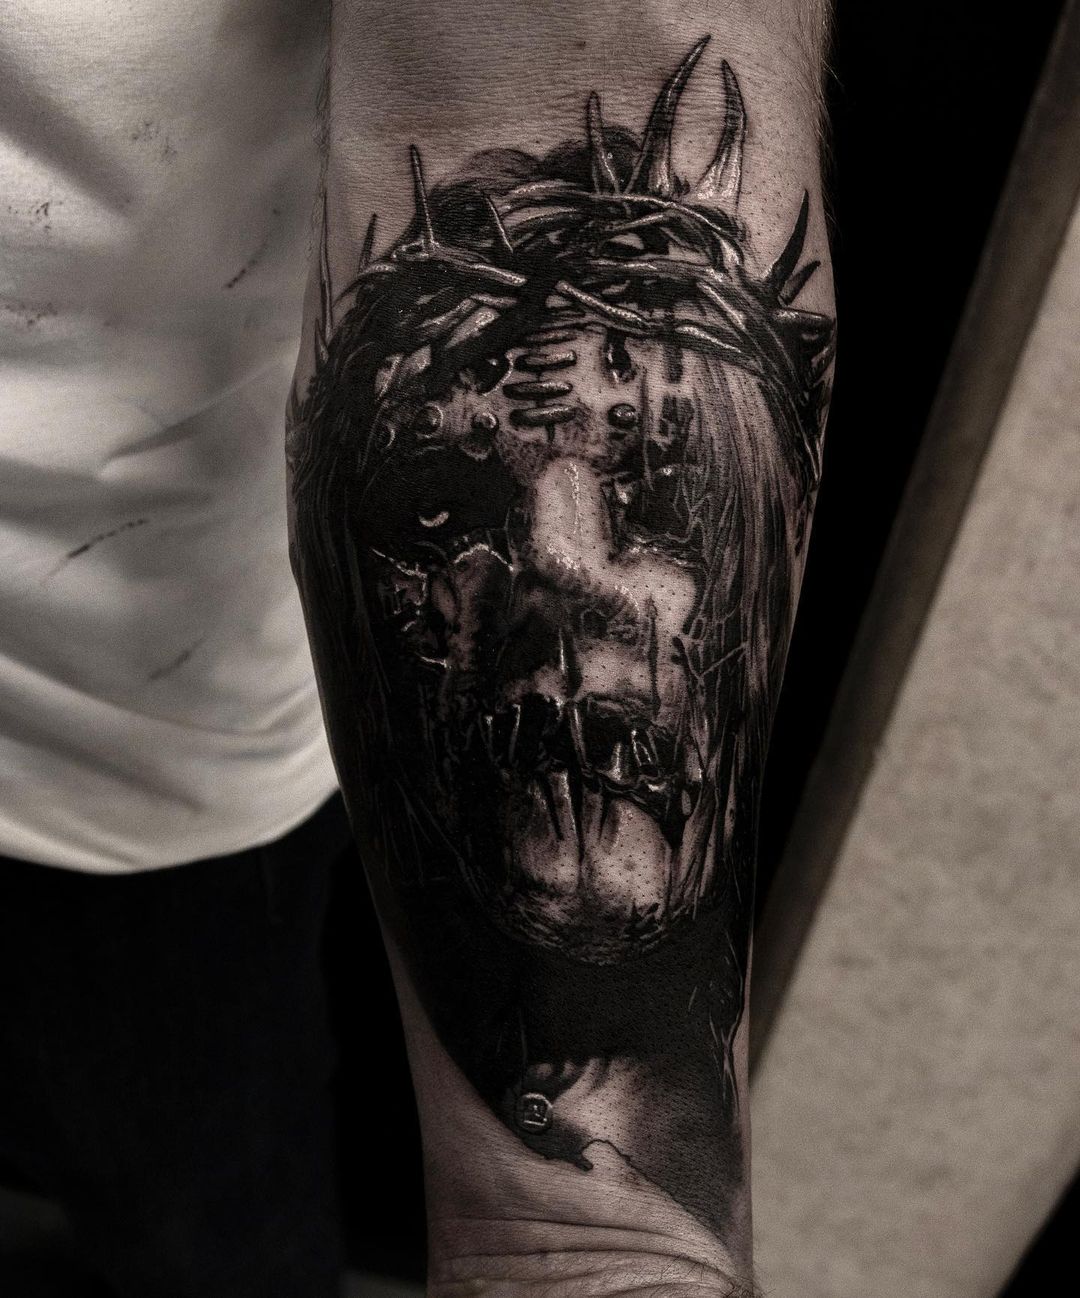 Michael Caamaño Jr on Twitter Joey Jordison All Hope Is Gone memorial  tribute tattoo I did last week My very first Slipknot piece Ive ever  done Thank you for trusting me with